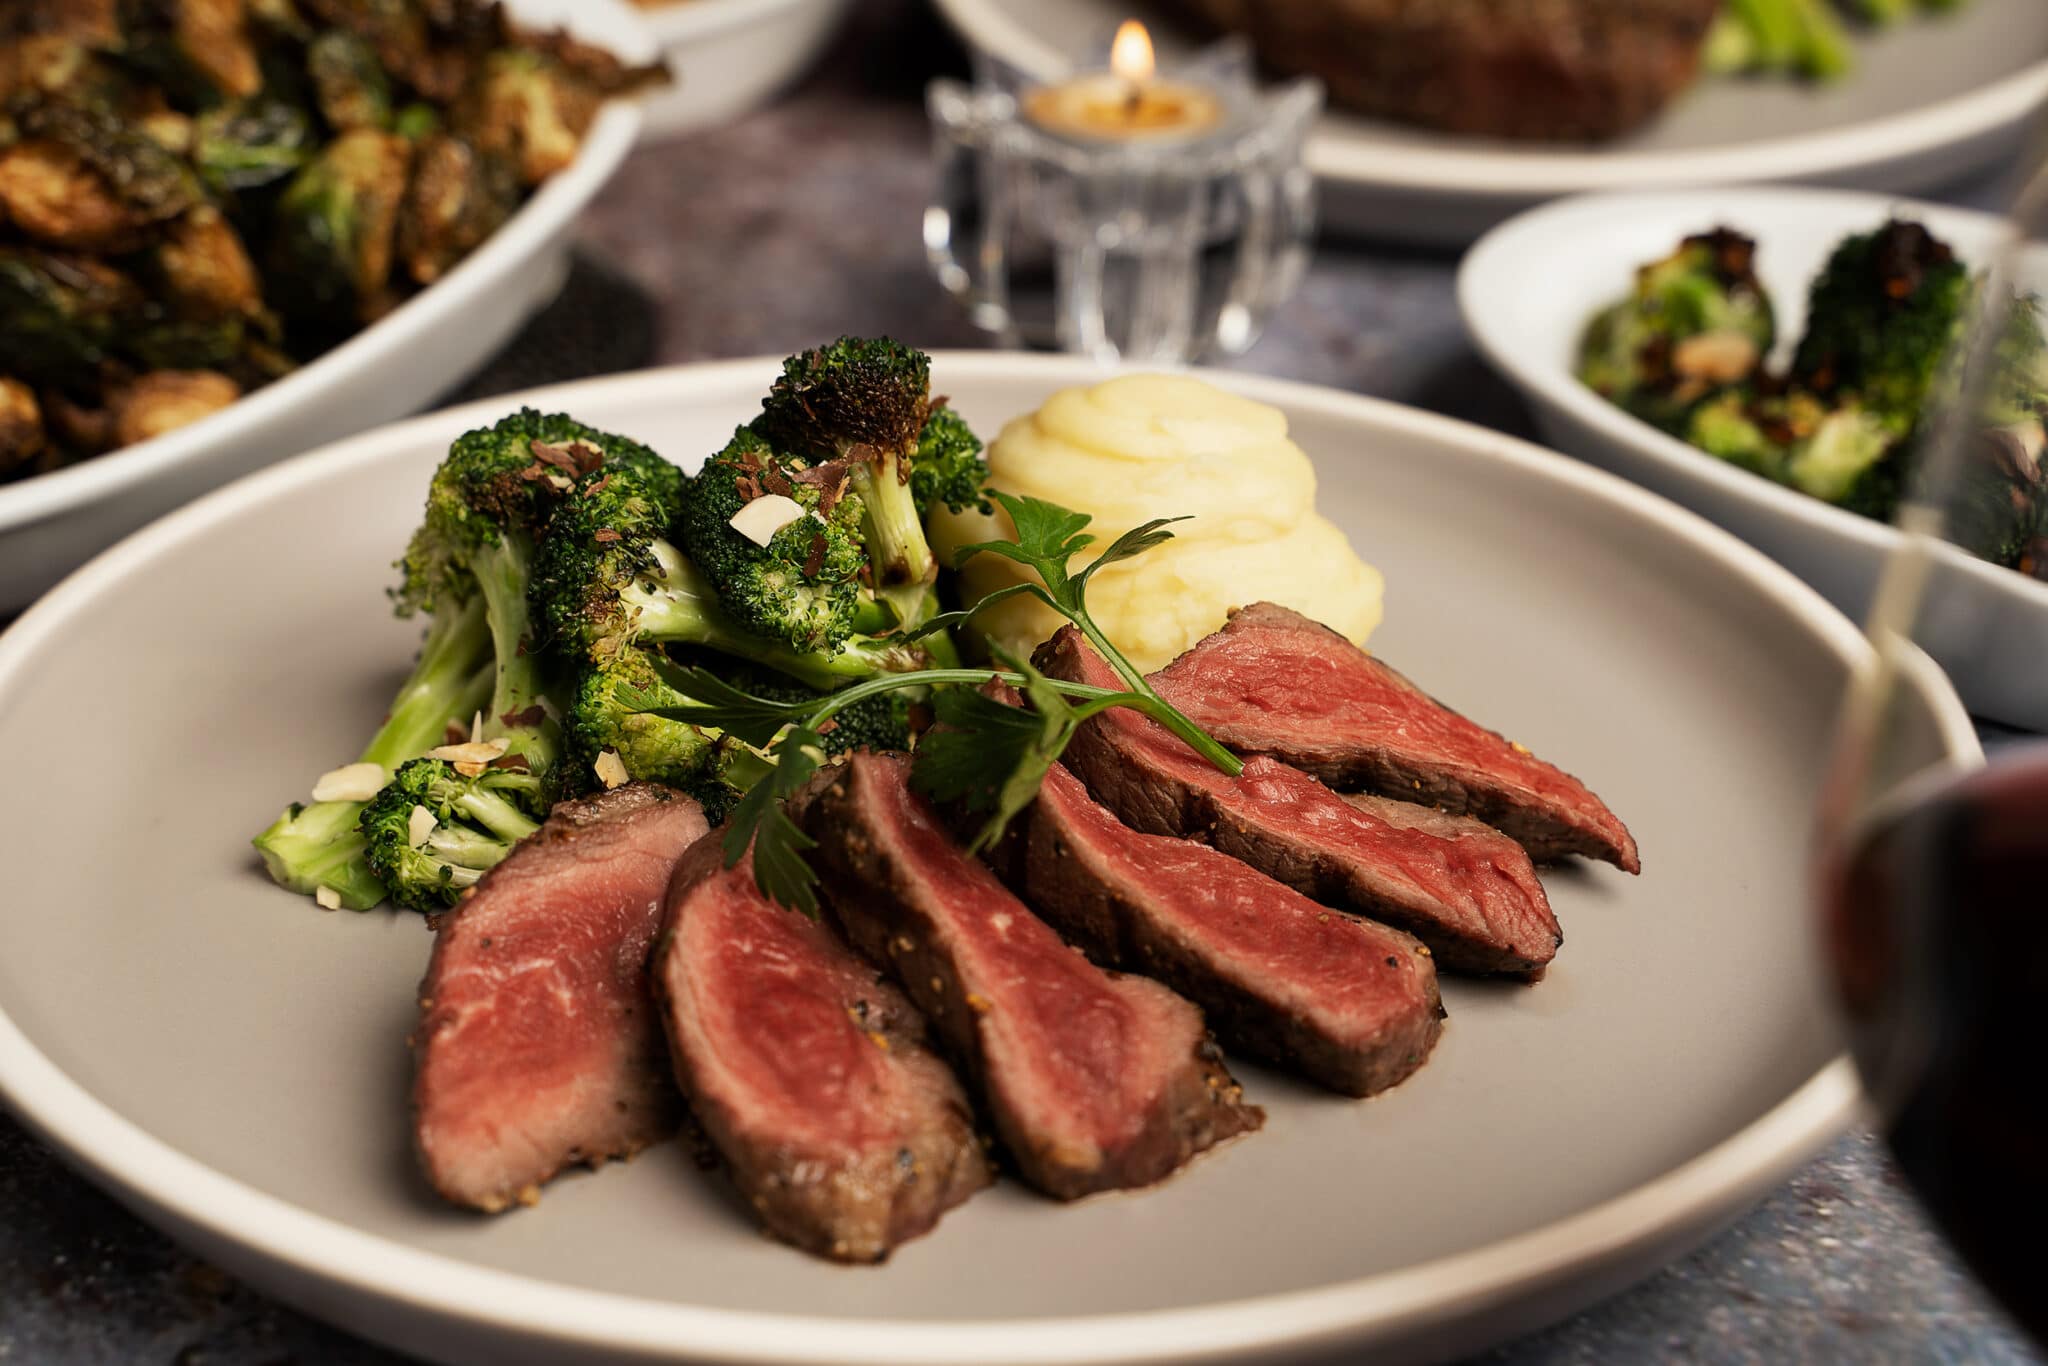 A Saltlik steak entree with mashed potato and broccoli, several sides in the background